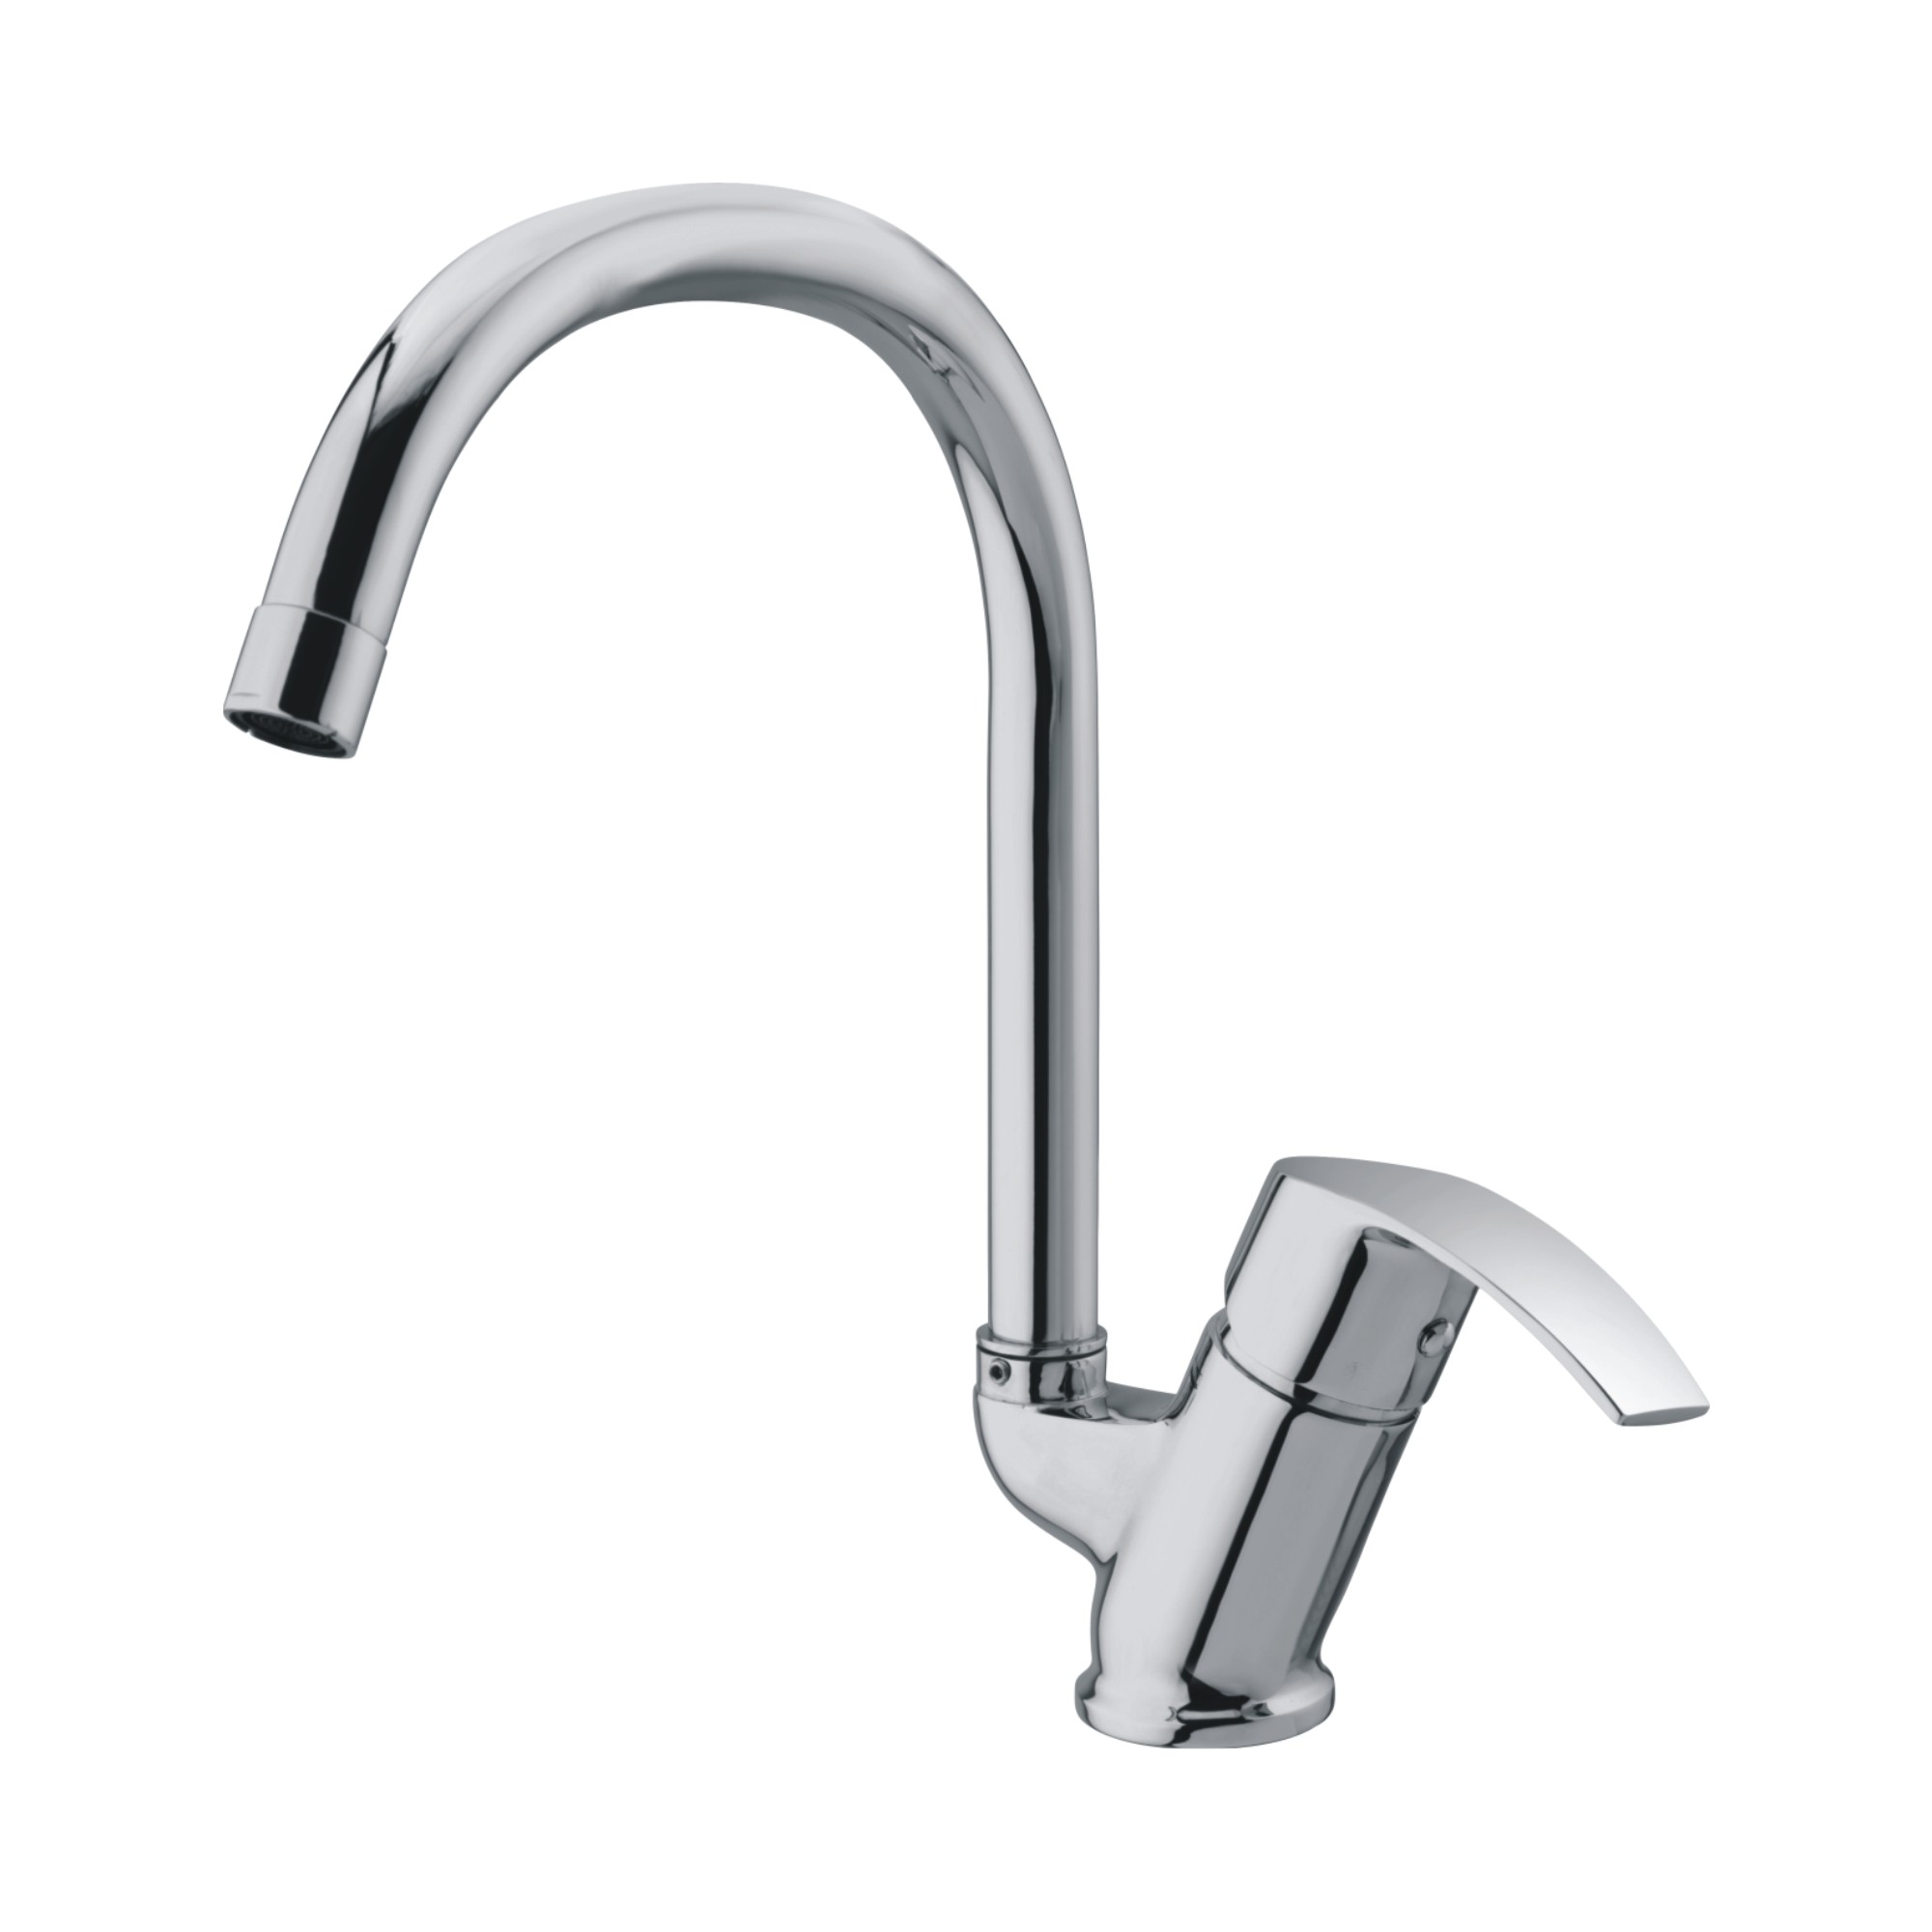 Quink Single Lever Sink Mixer Table Mounted